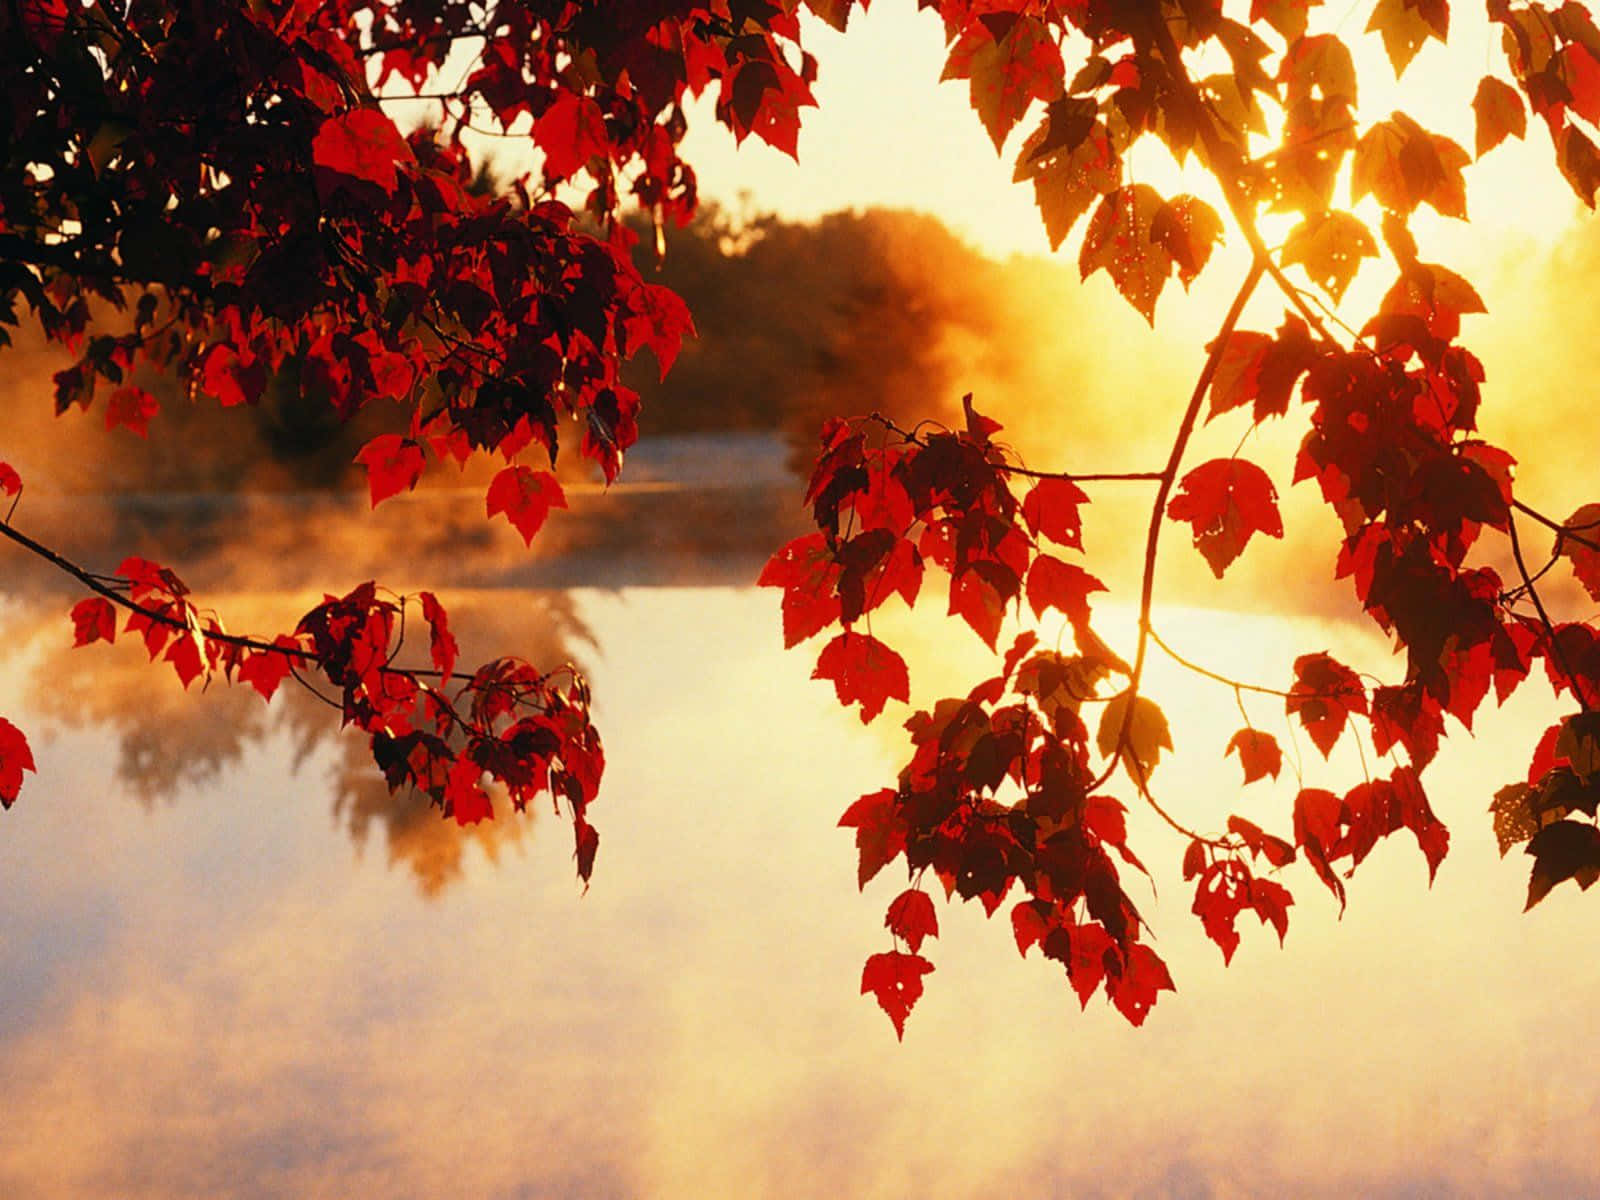 Let the warm colors of autumn fill your life Wallpaper